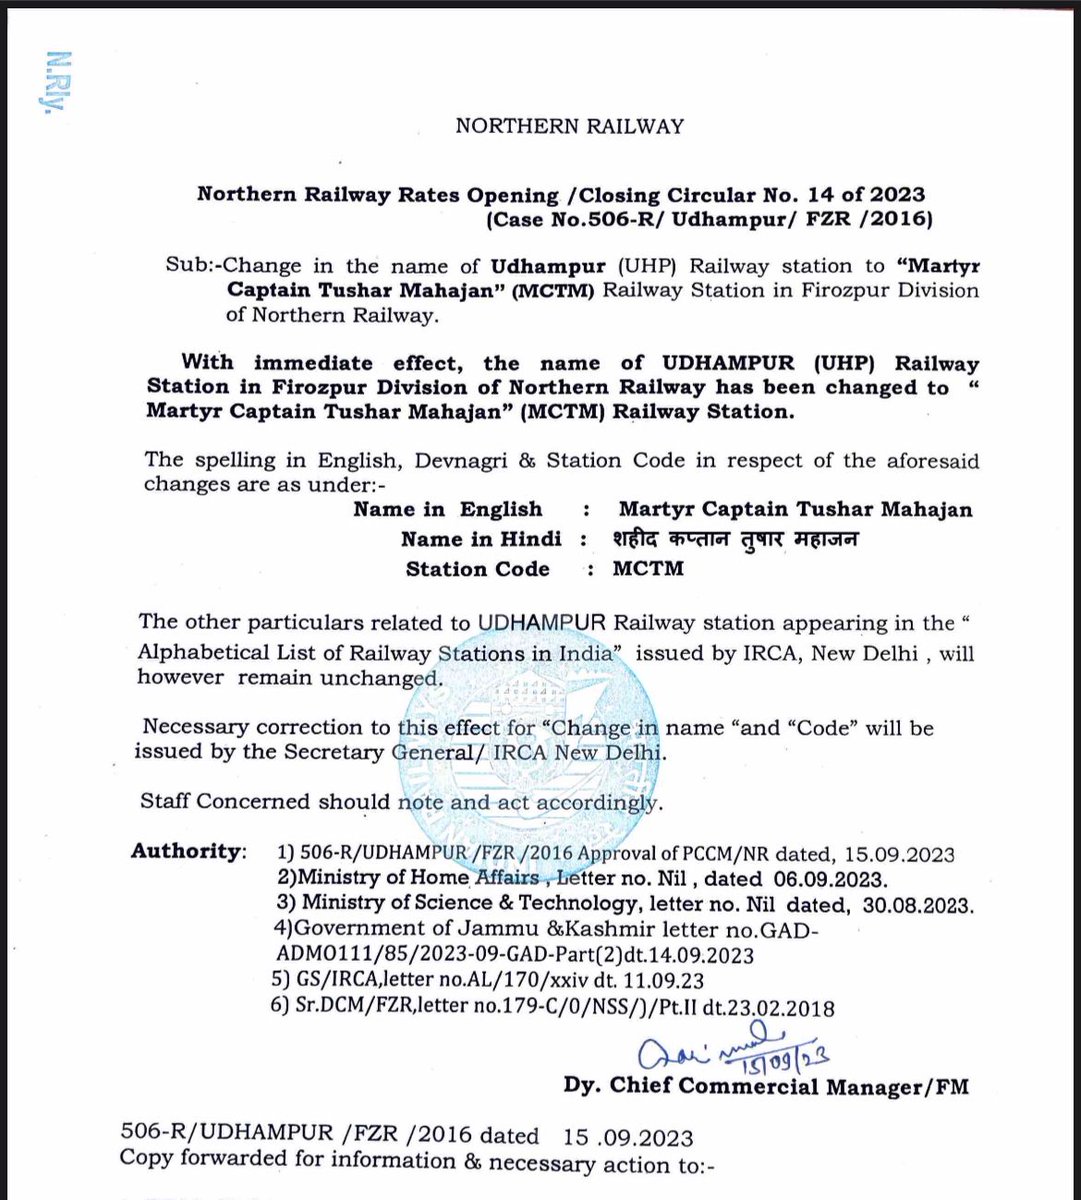 #Udhampur: Final Notification issued by Indian Railway authorities, for all concerned, to use the name “Martyr Captain Tushar Mahajan Railway Station”(#MCTM Railway Station) in all future documentation and deliberations.